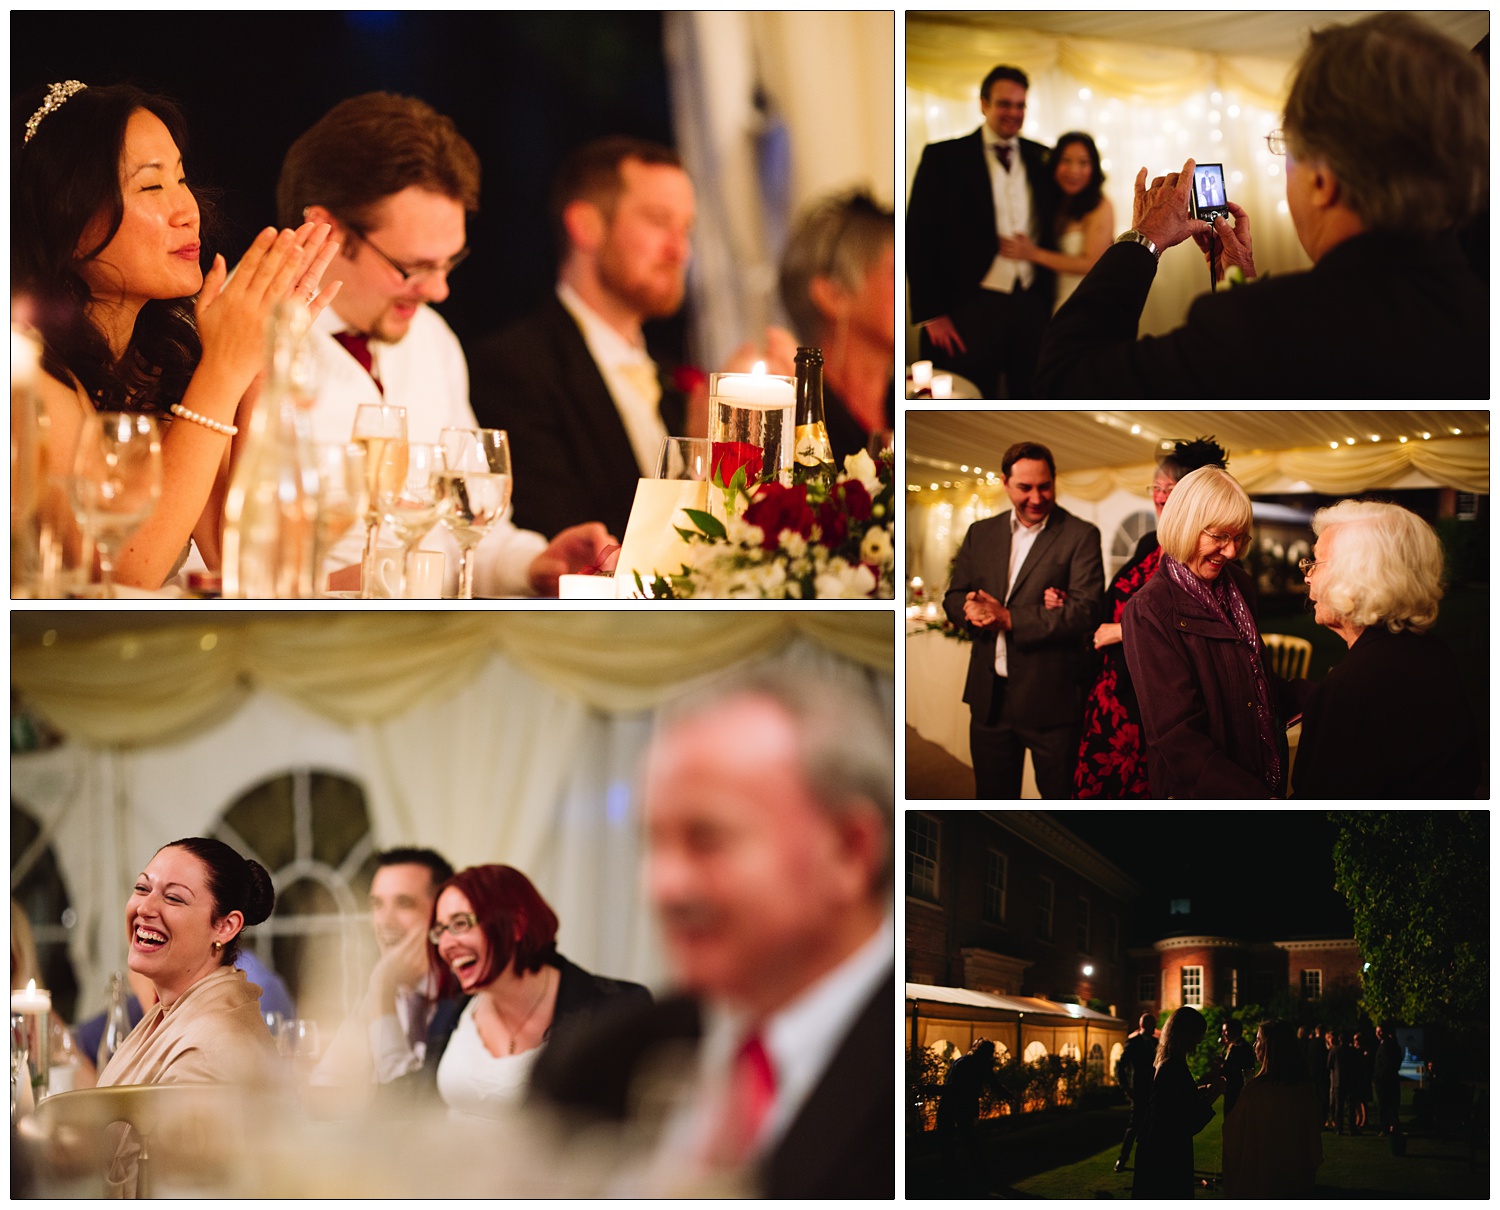 Candid pictures from the wedding breakfast at Hedingham castle.